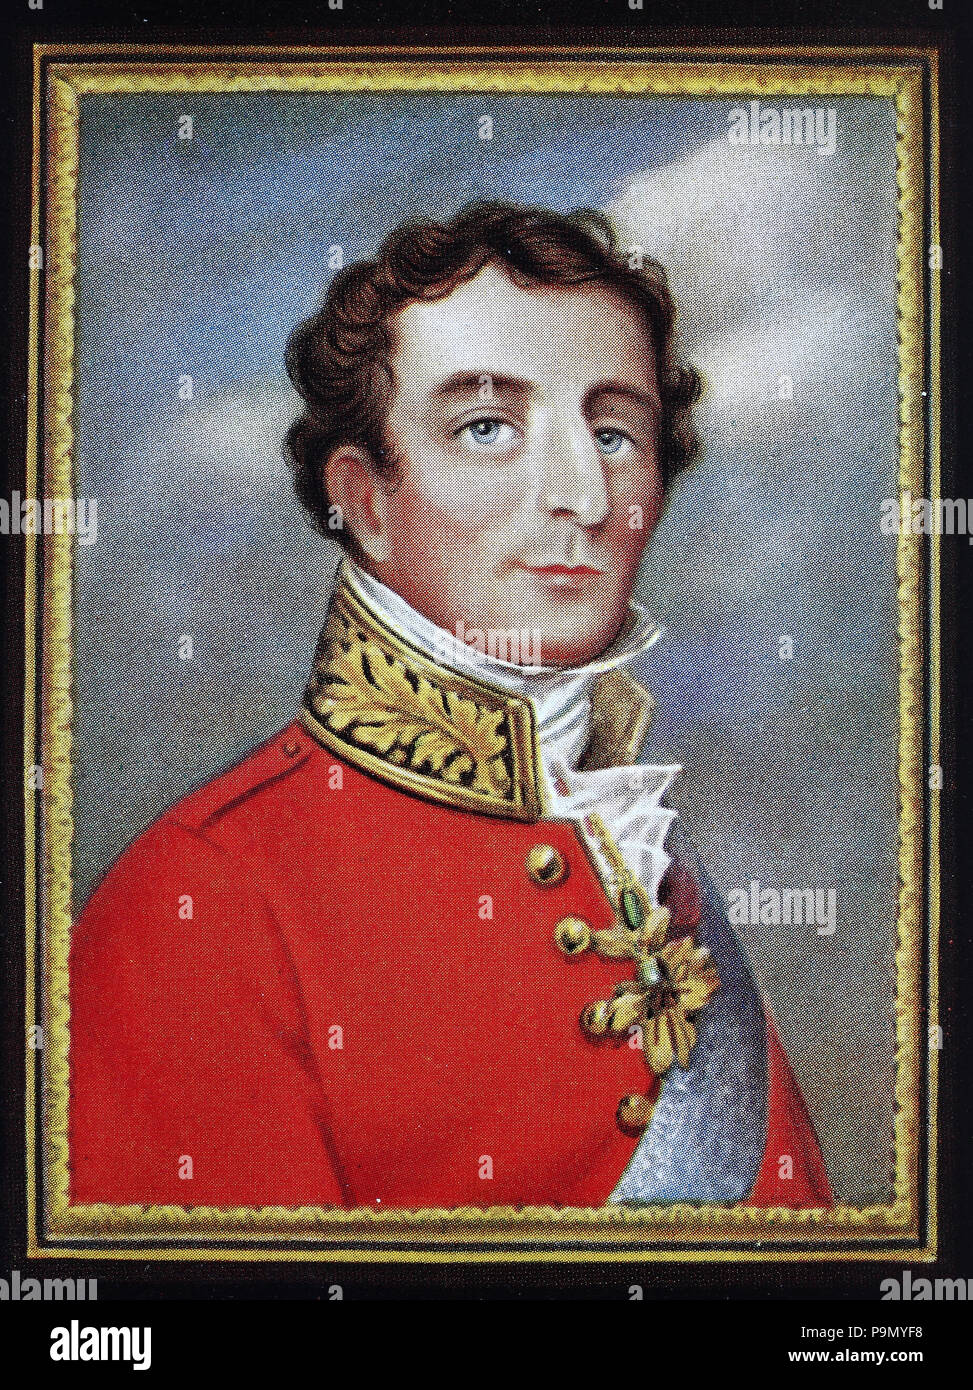 Arthur Wellesley, 1st Duke of Wellington, 1 May 1769 â€“ 14 September 1852, was an Anglo-Irish soldier and statesman who was one of the leading military and political figures of 19th-century Britain, digital improved reproduction of an original print from the year 1900 Stock Photo